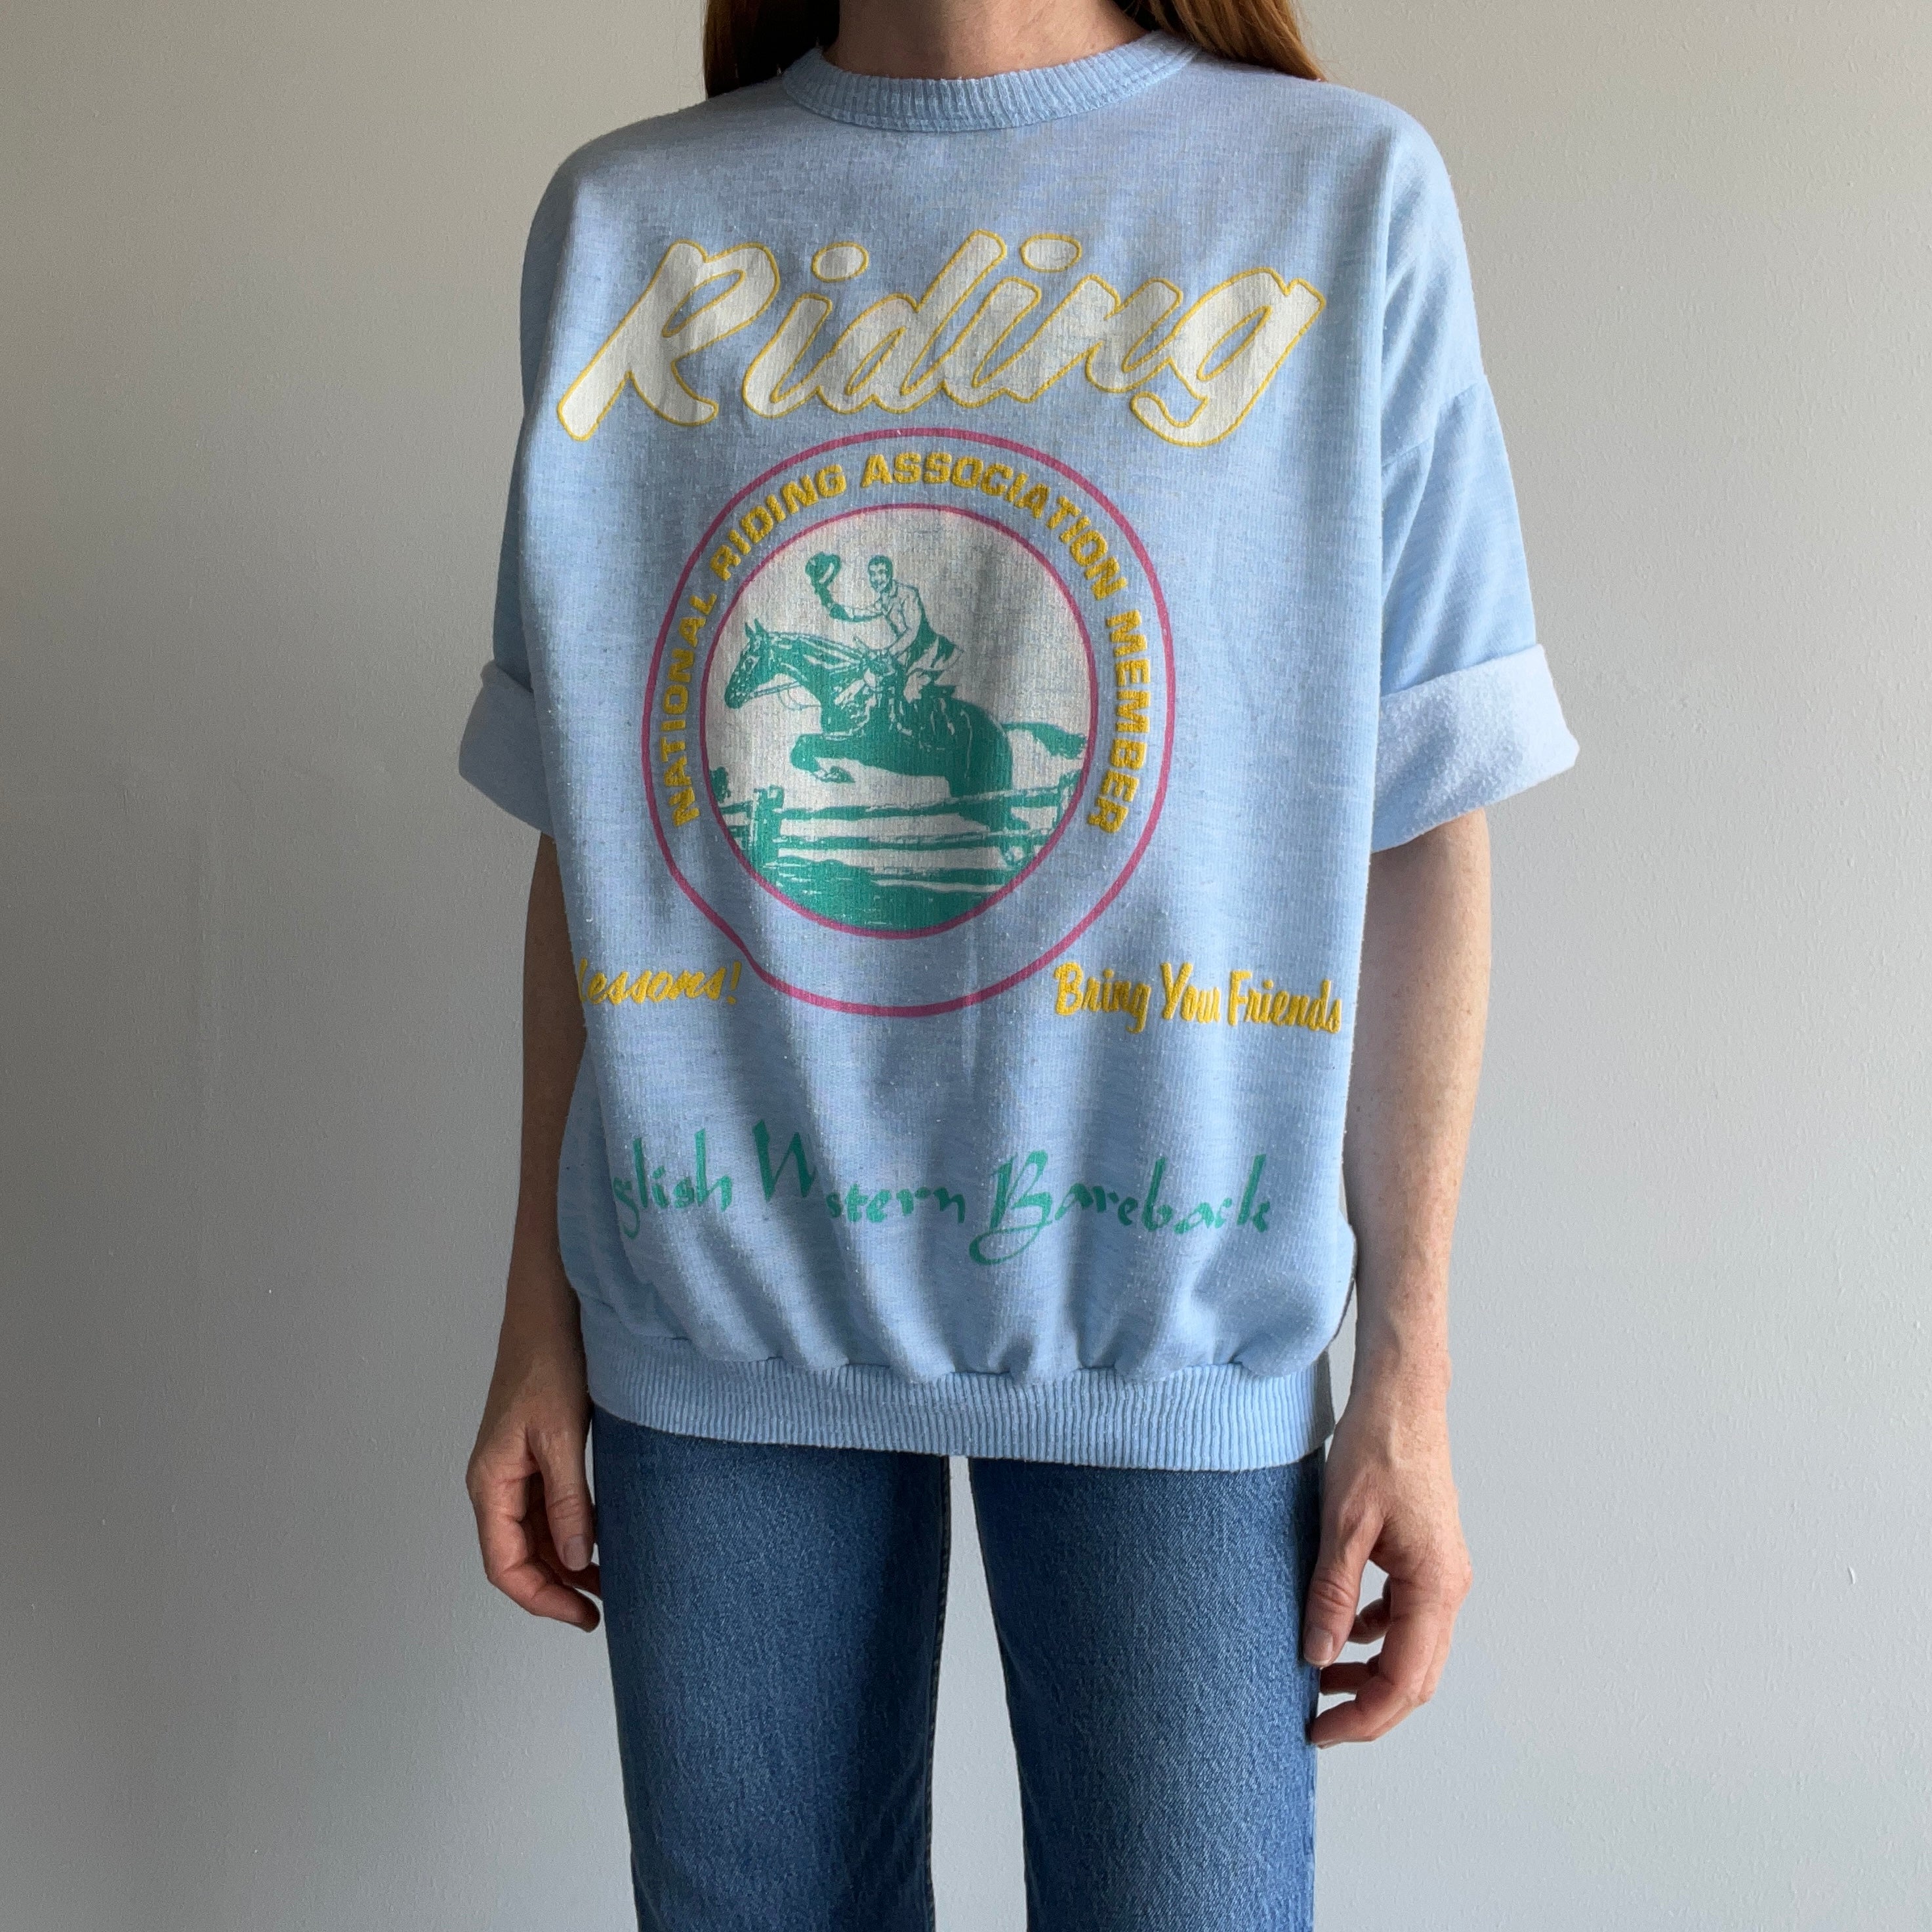 1980s Incredible Horsey Person English Riding Sweatshirt with Stains